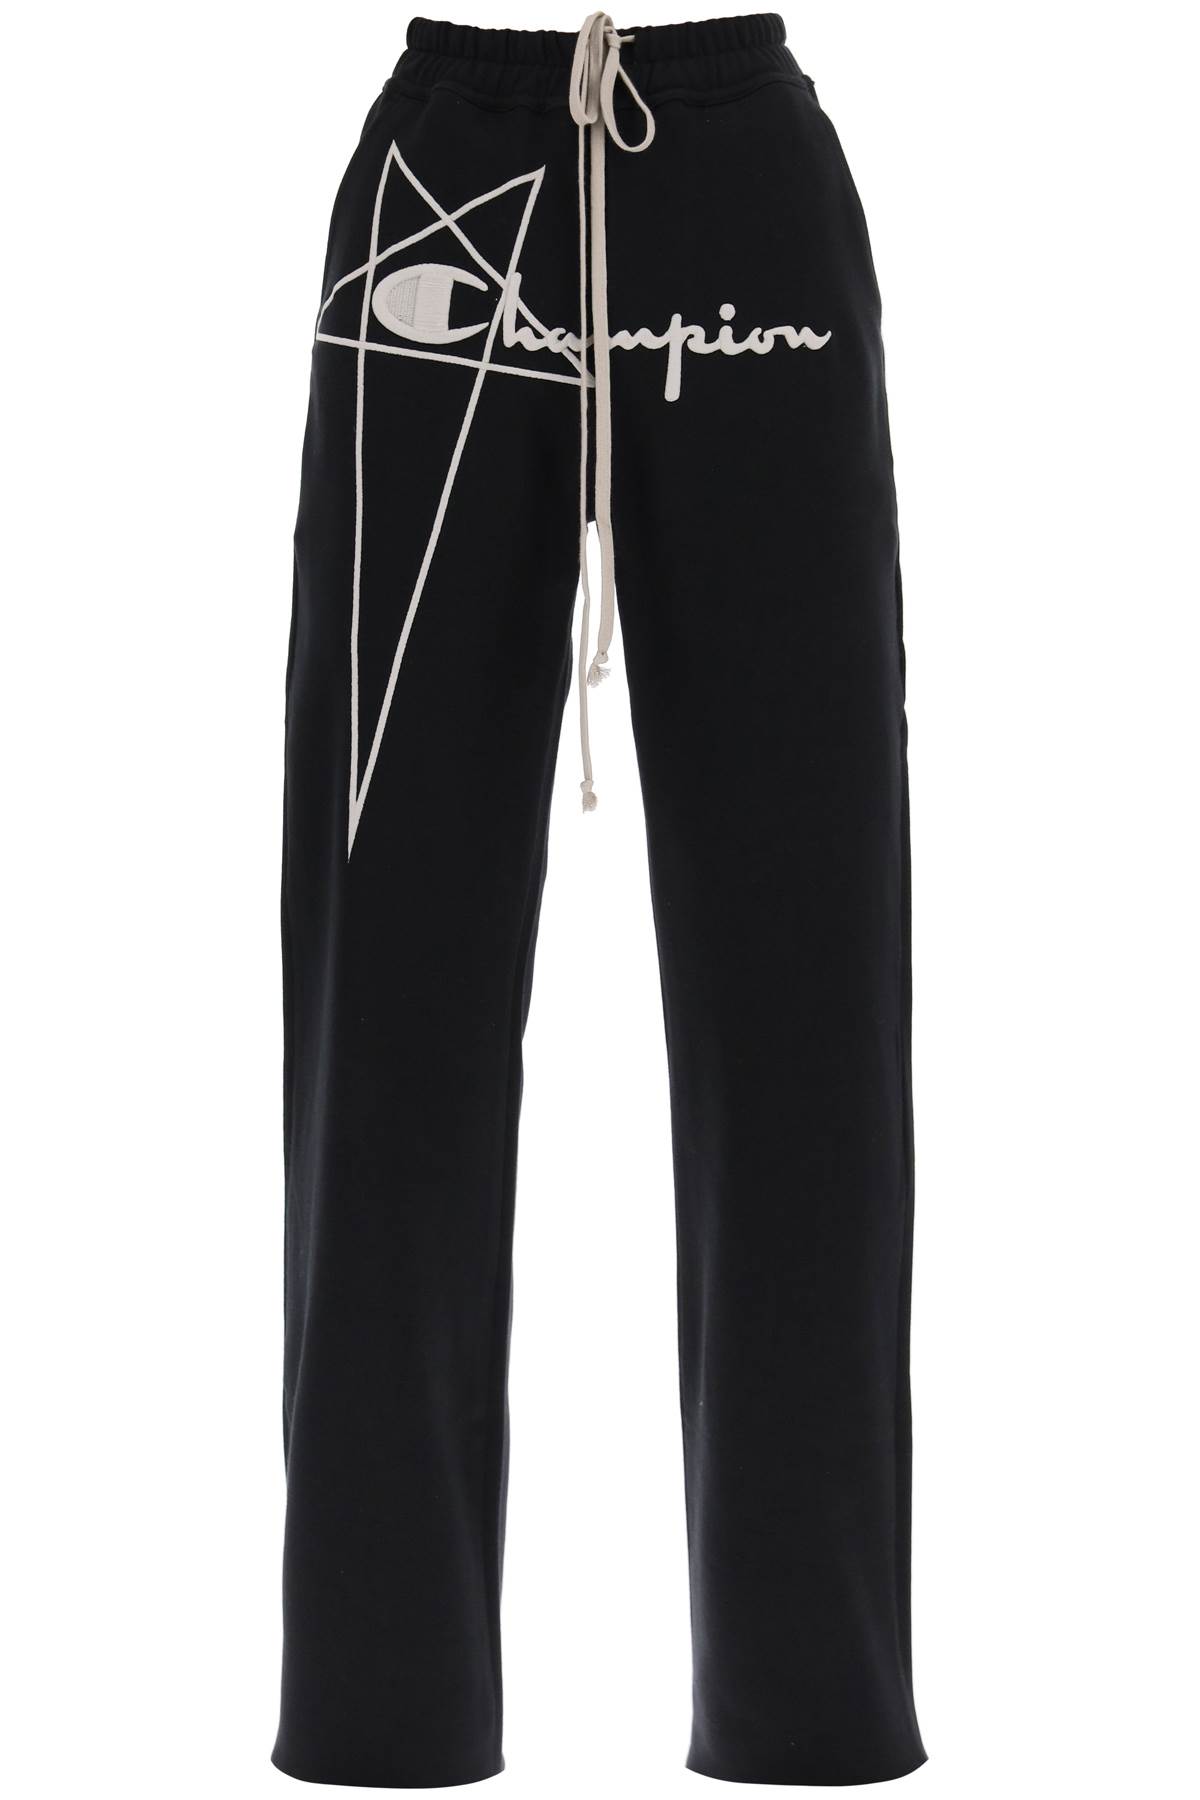 RICK OWENS DIETRICH TRACK trousers